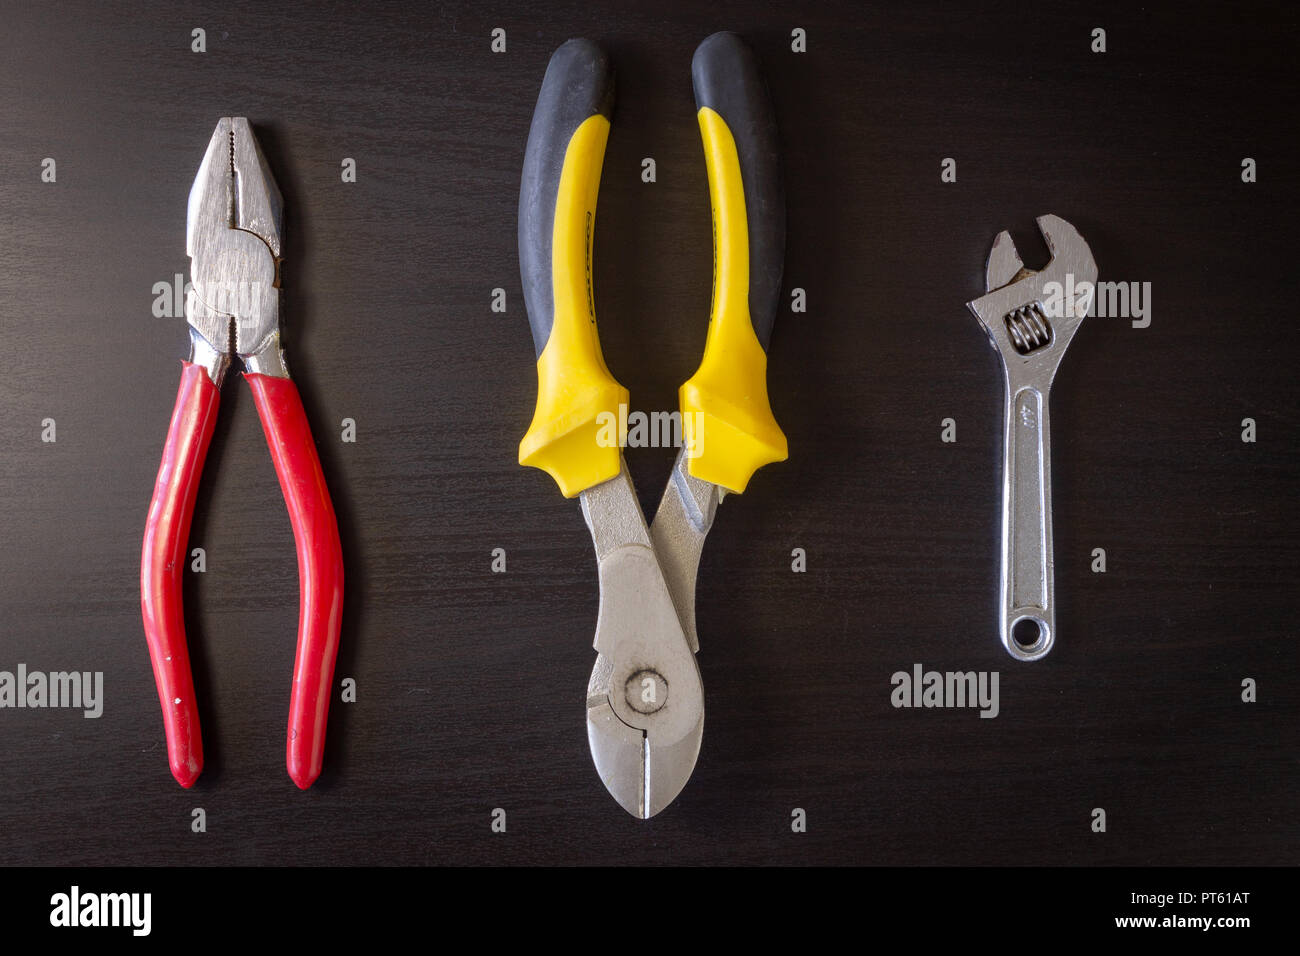 https://c8.alamy.com/comp/PT61AT/a-black-wooden-background-with-various-hardware-tools-alligned-horizontally-pliers-cutting-pliers-wrench-PT61AT.jpg